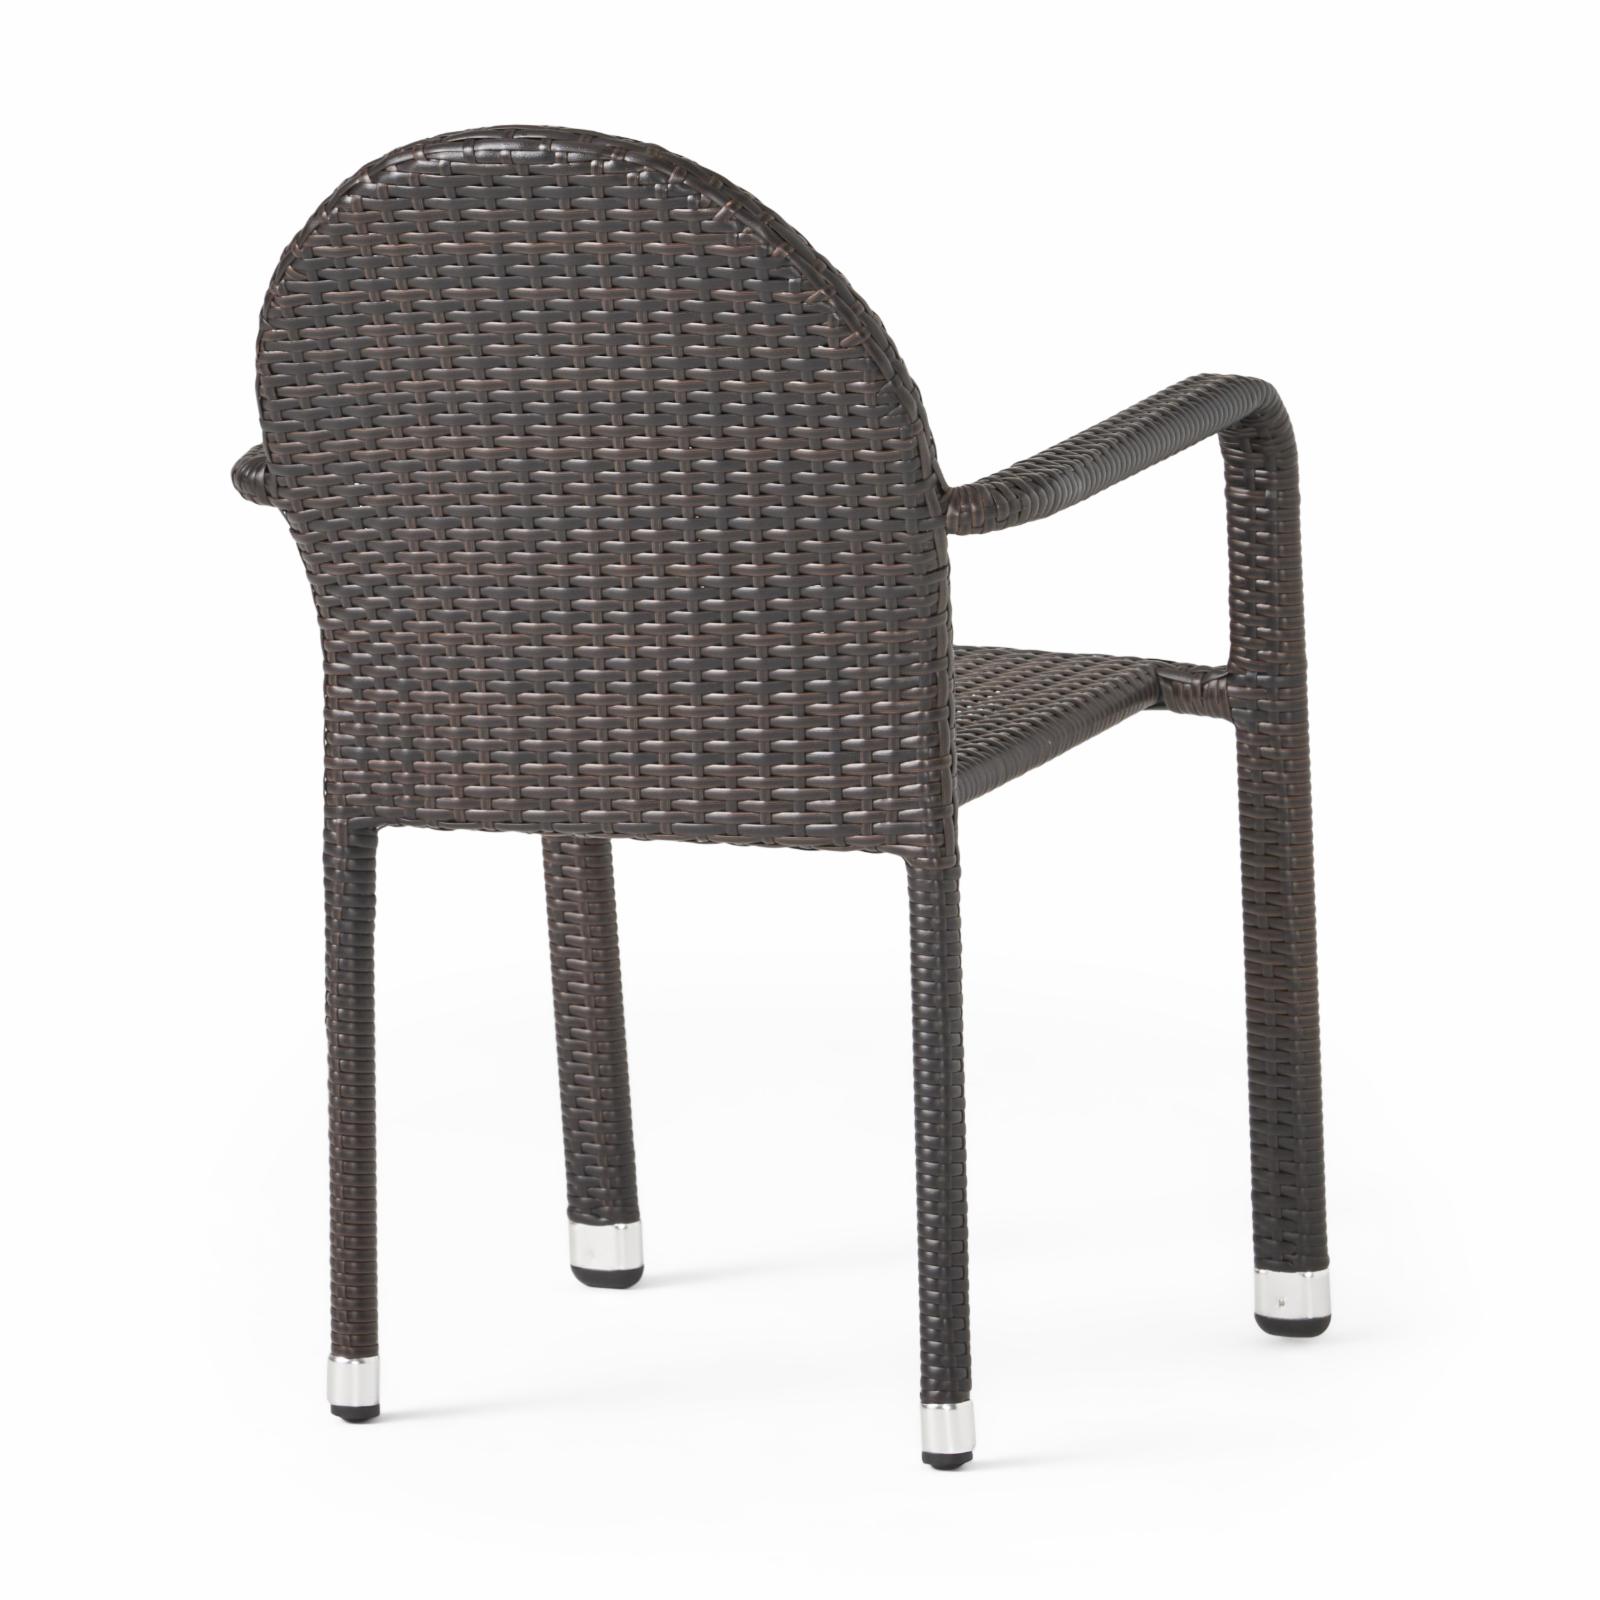 Ariyaan Outdoor Wicker Stacking Dining Chairs - Set of 2 - Multibrown - image 3 of 10